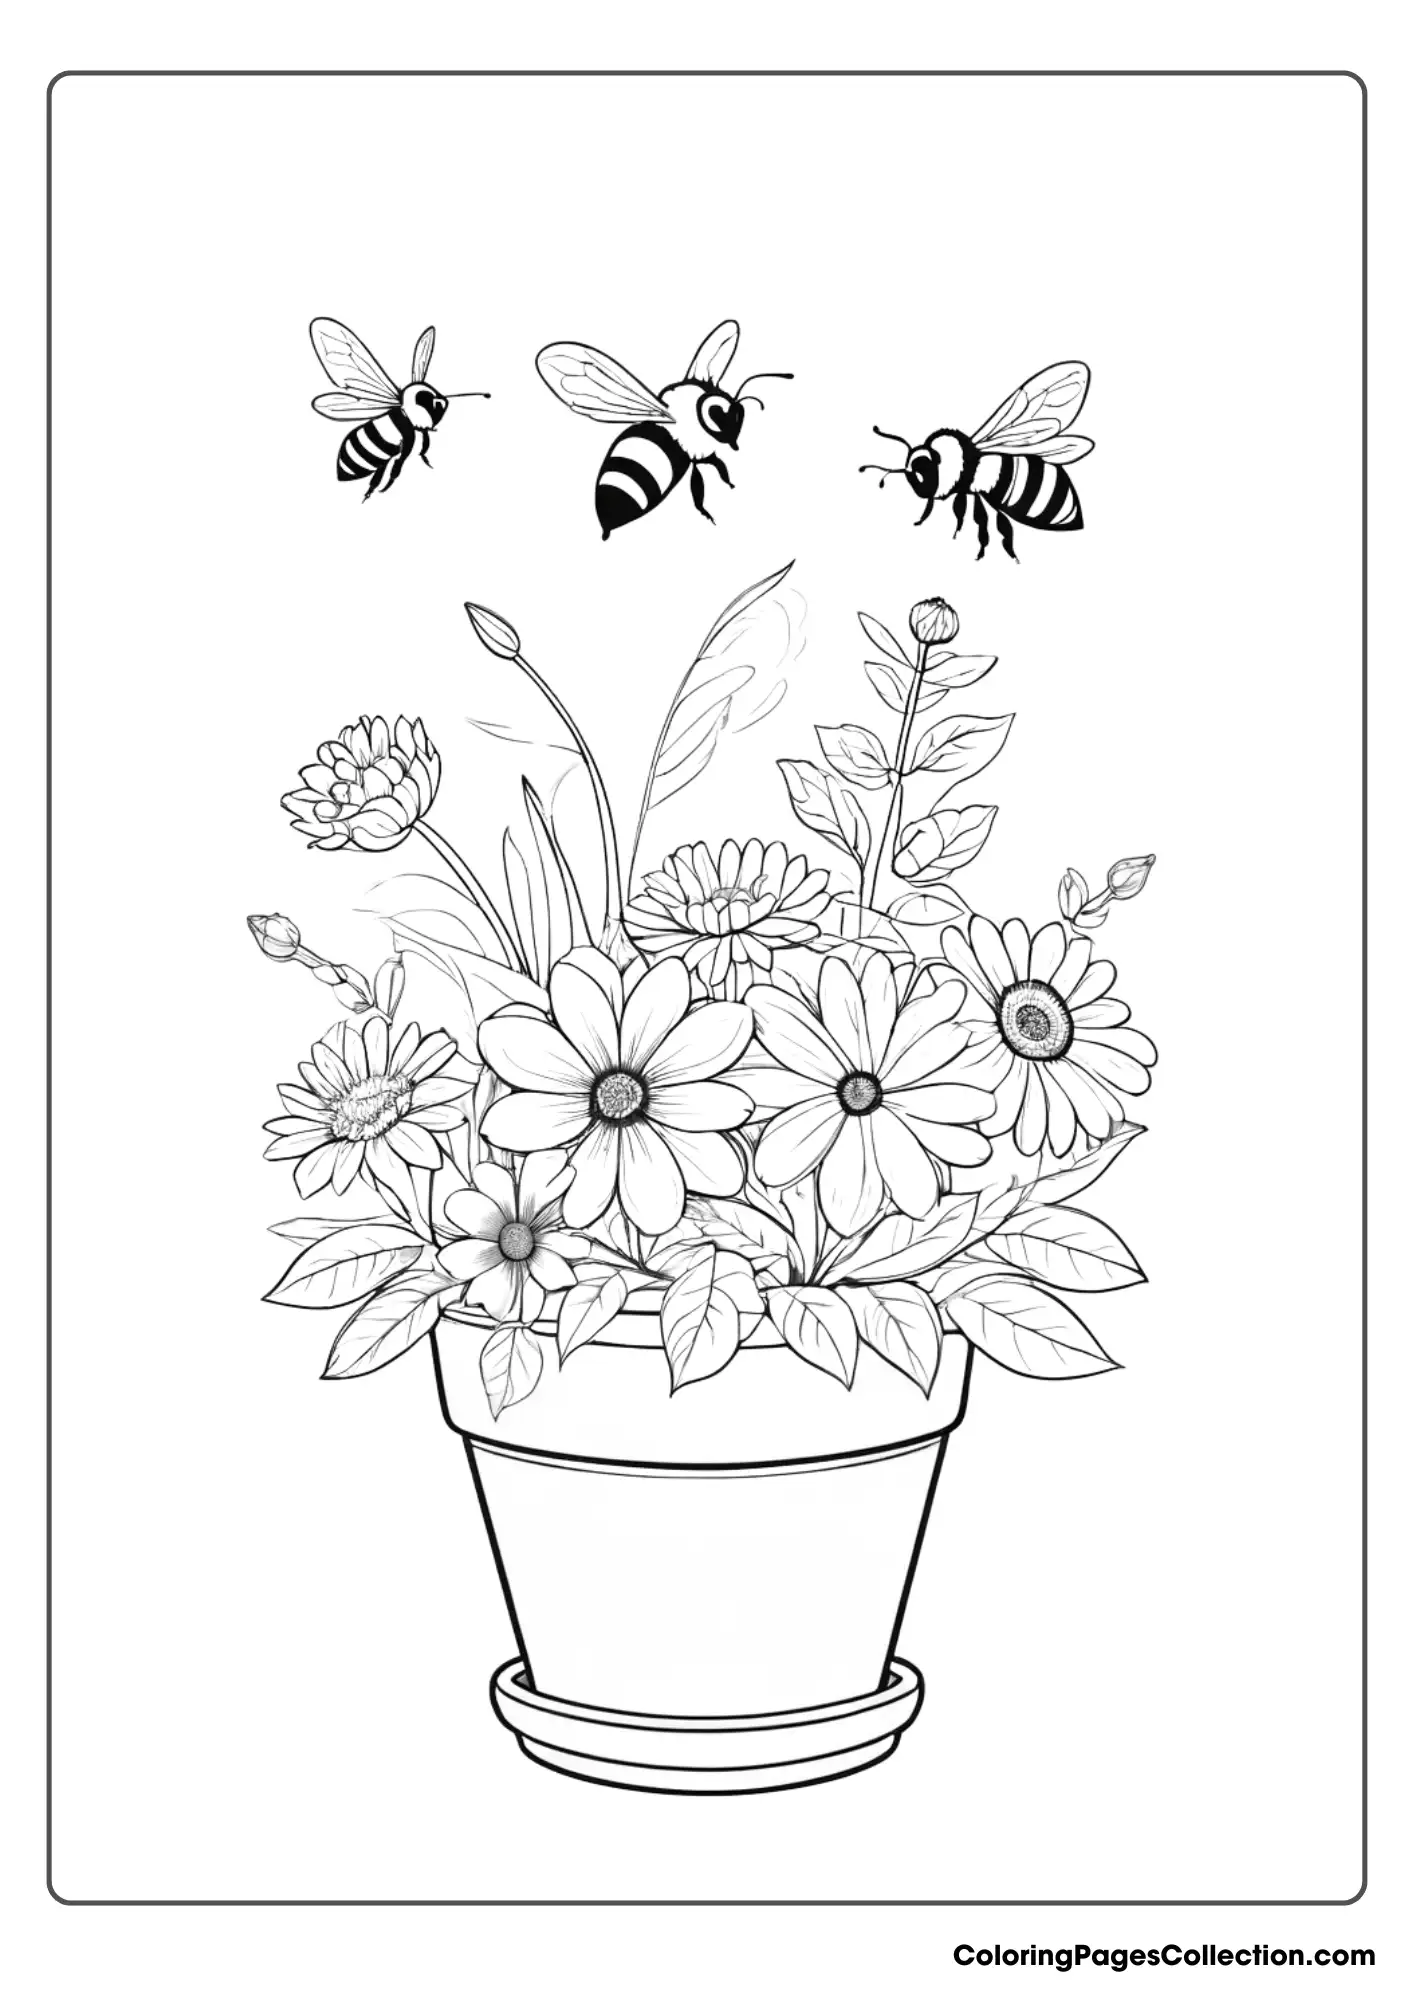 A Flower Pot With Bees And Flowers Coloring Page